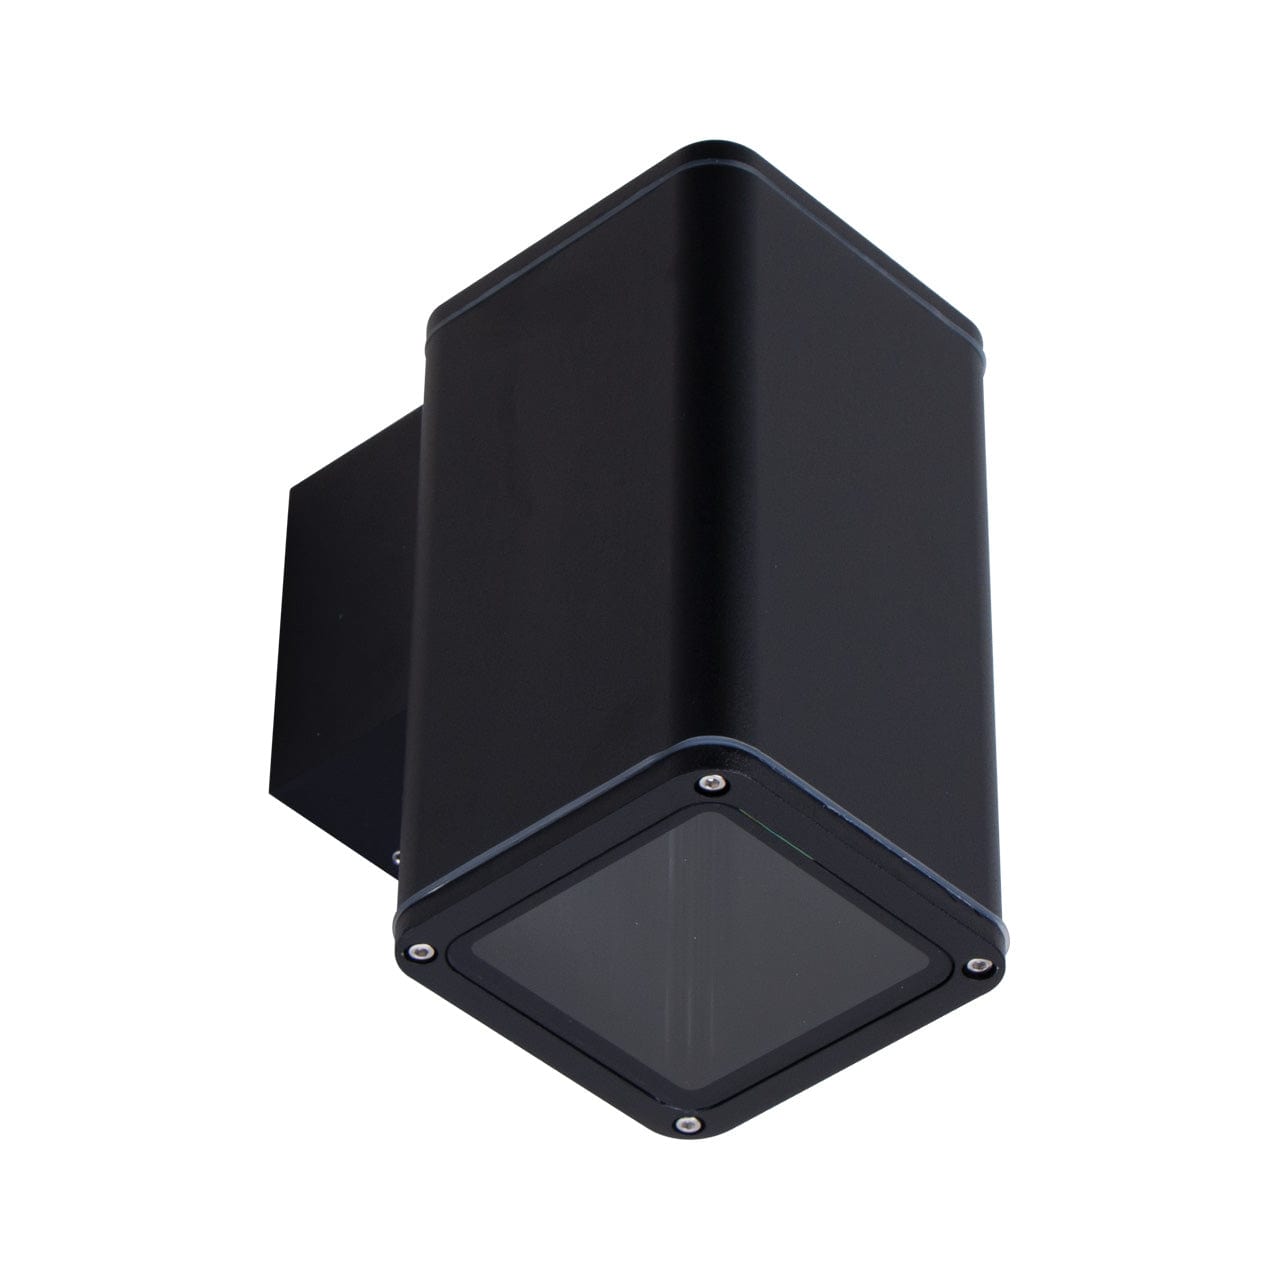 Domus Lighting Outdoor Wall Lights BLACK / 5000K DOMUS PIPER-1 SQUARE LED WALL LIGHT Lights-For-You 49262